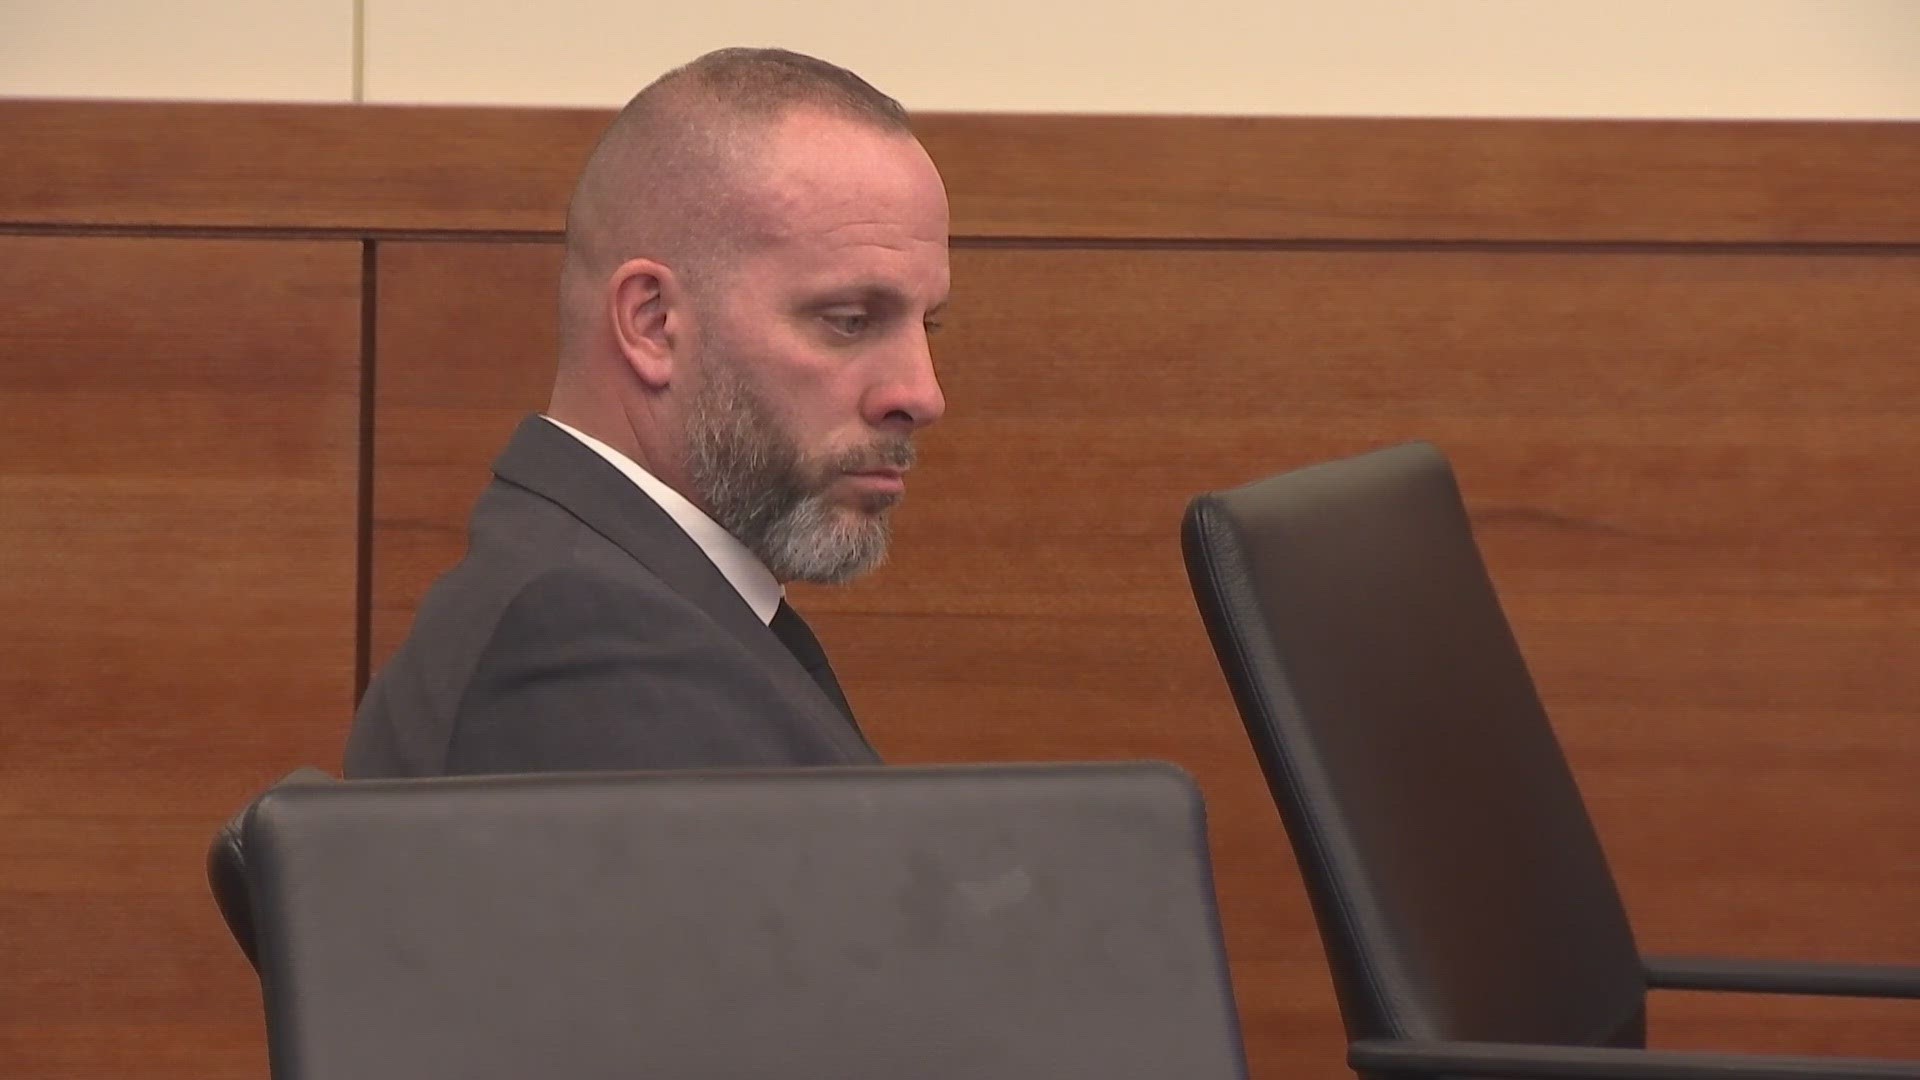 Jason Meade Murder Trial Jury Now Deliberating Case